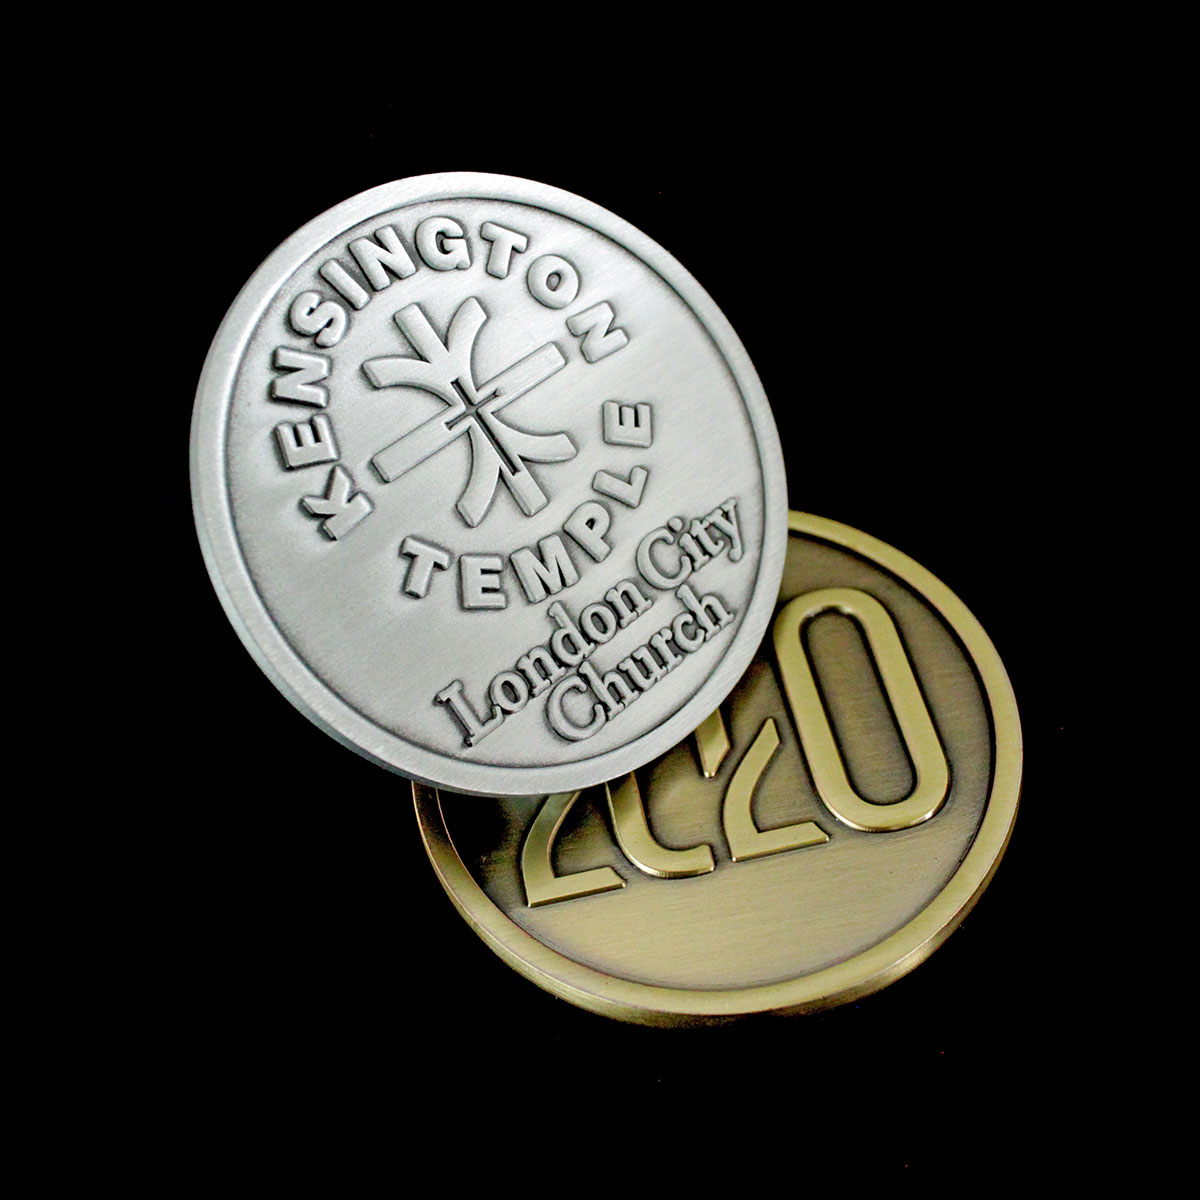 Bespoke Kensington Temple Commemorative Coins - 50mm Gold and Silver Antique Smooth Finish combination coins